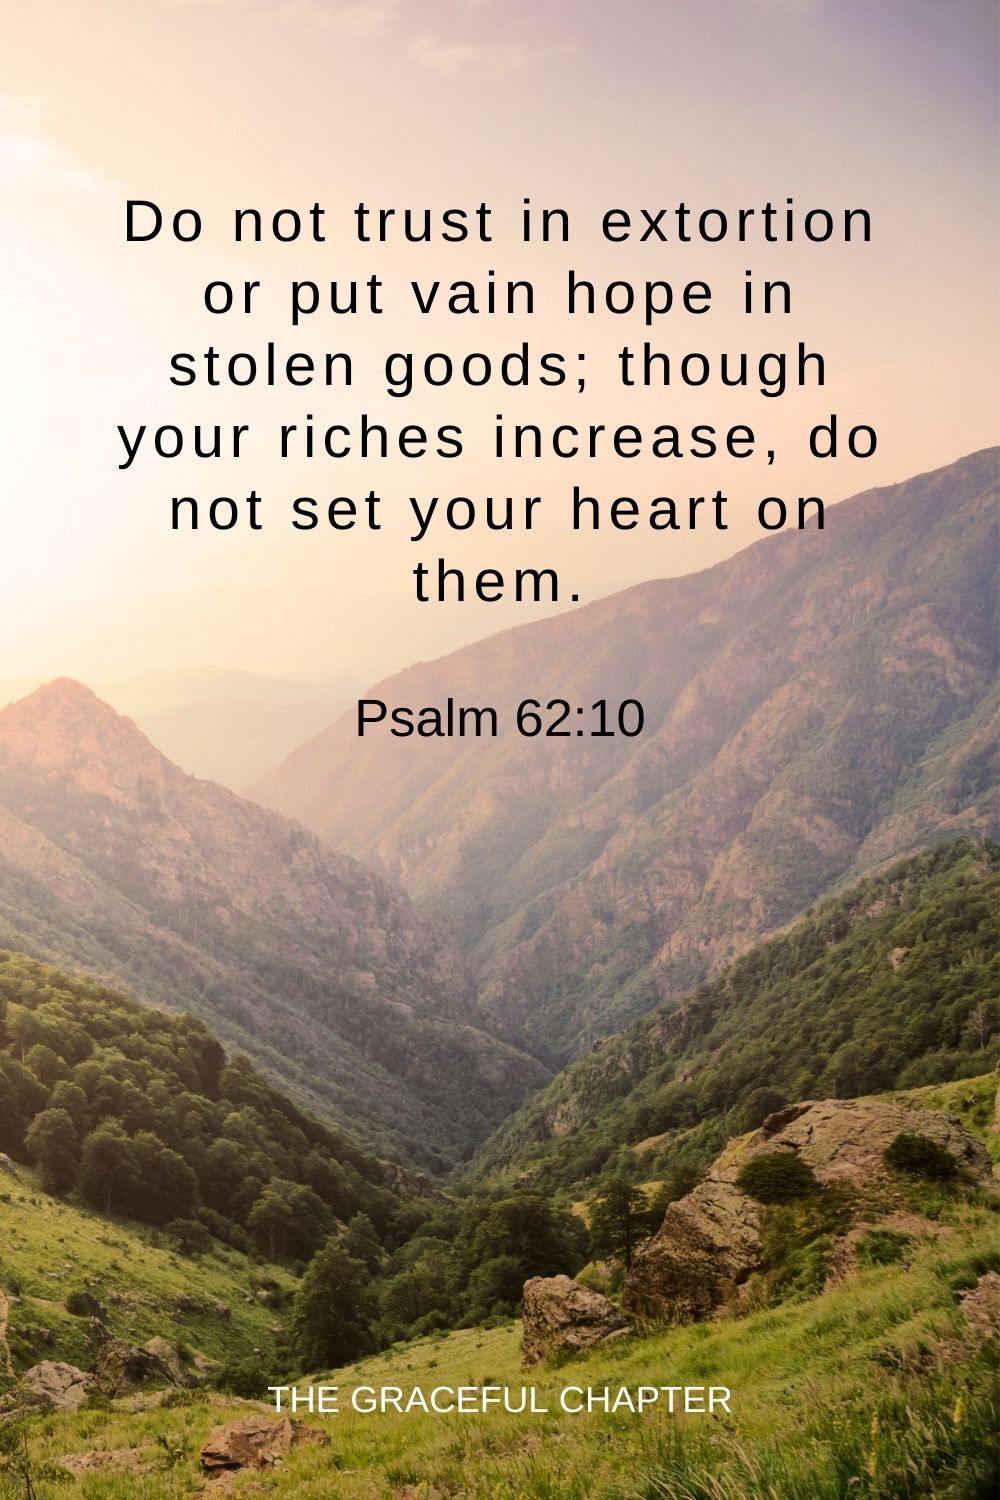 Do not trust in extortion or put vain hope in stolen goods; though your riches increase, do not set your heart on them. Psalm 62:10